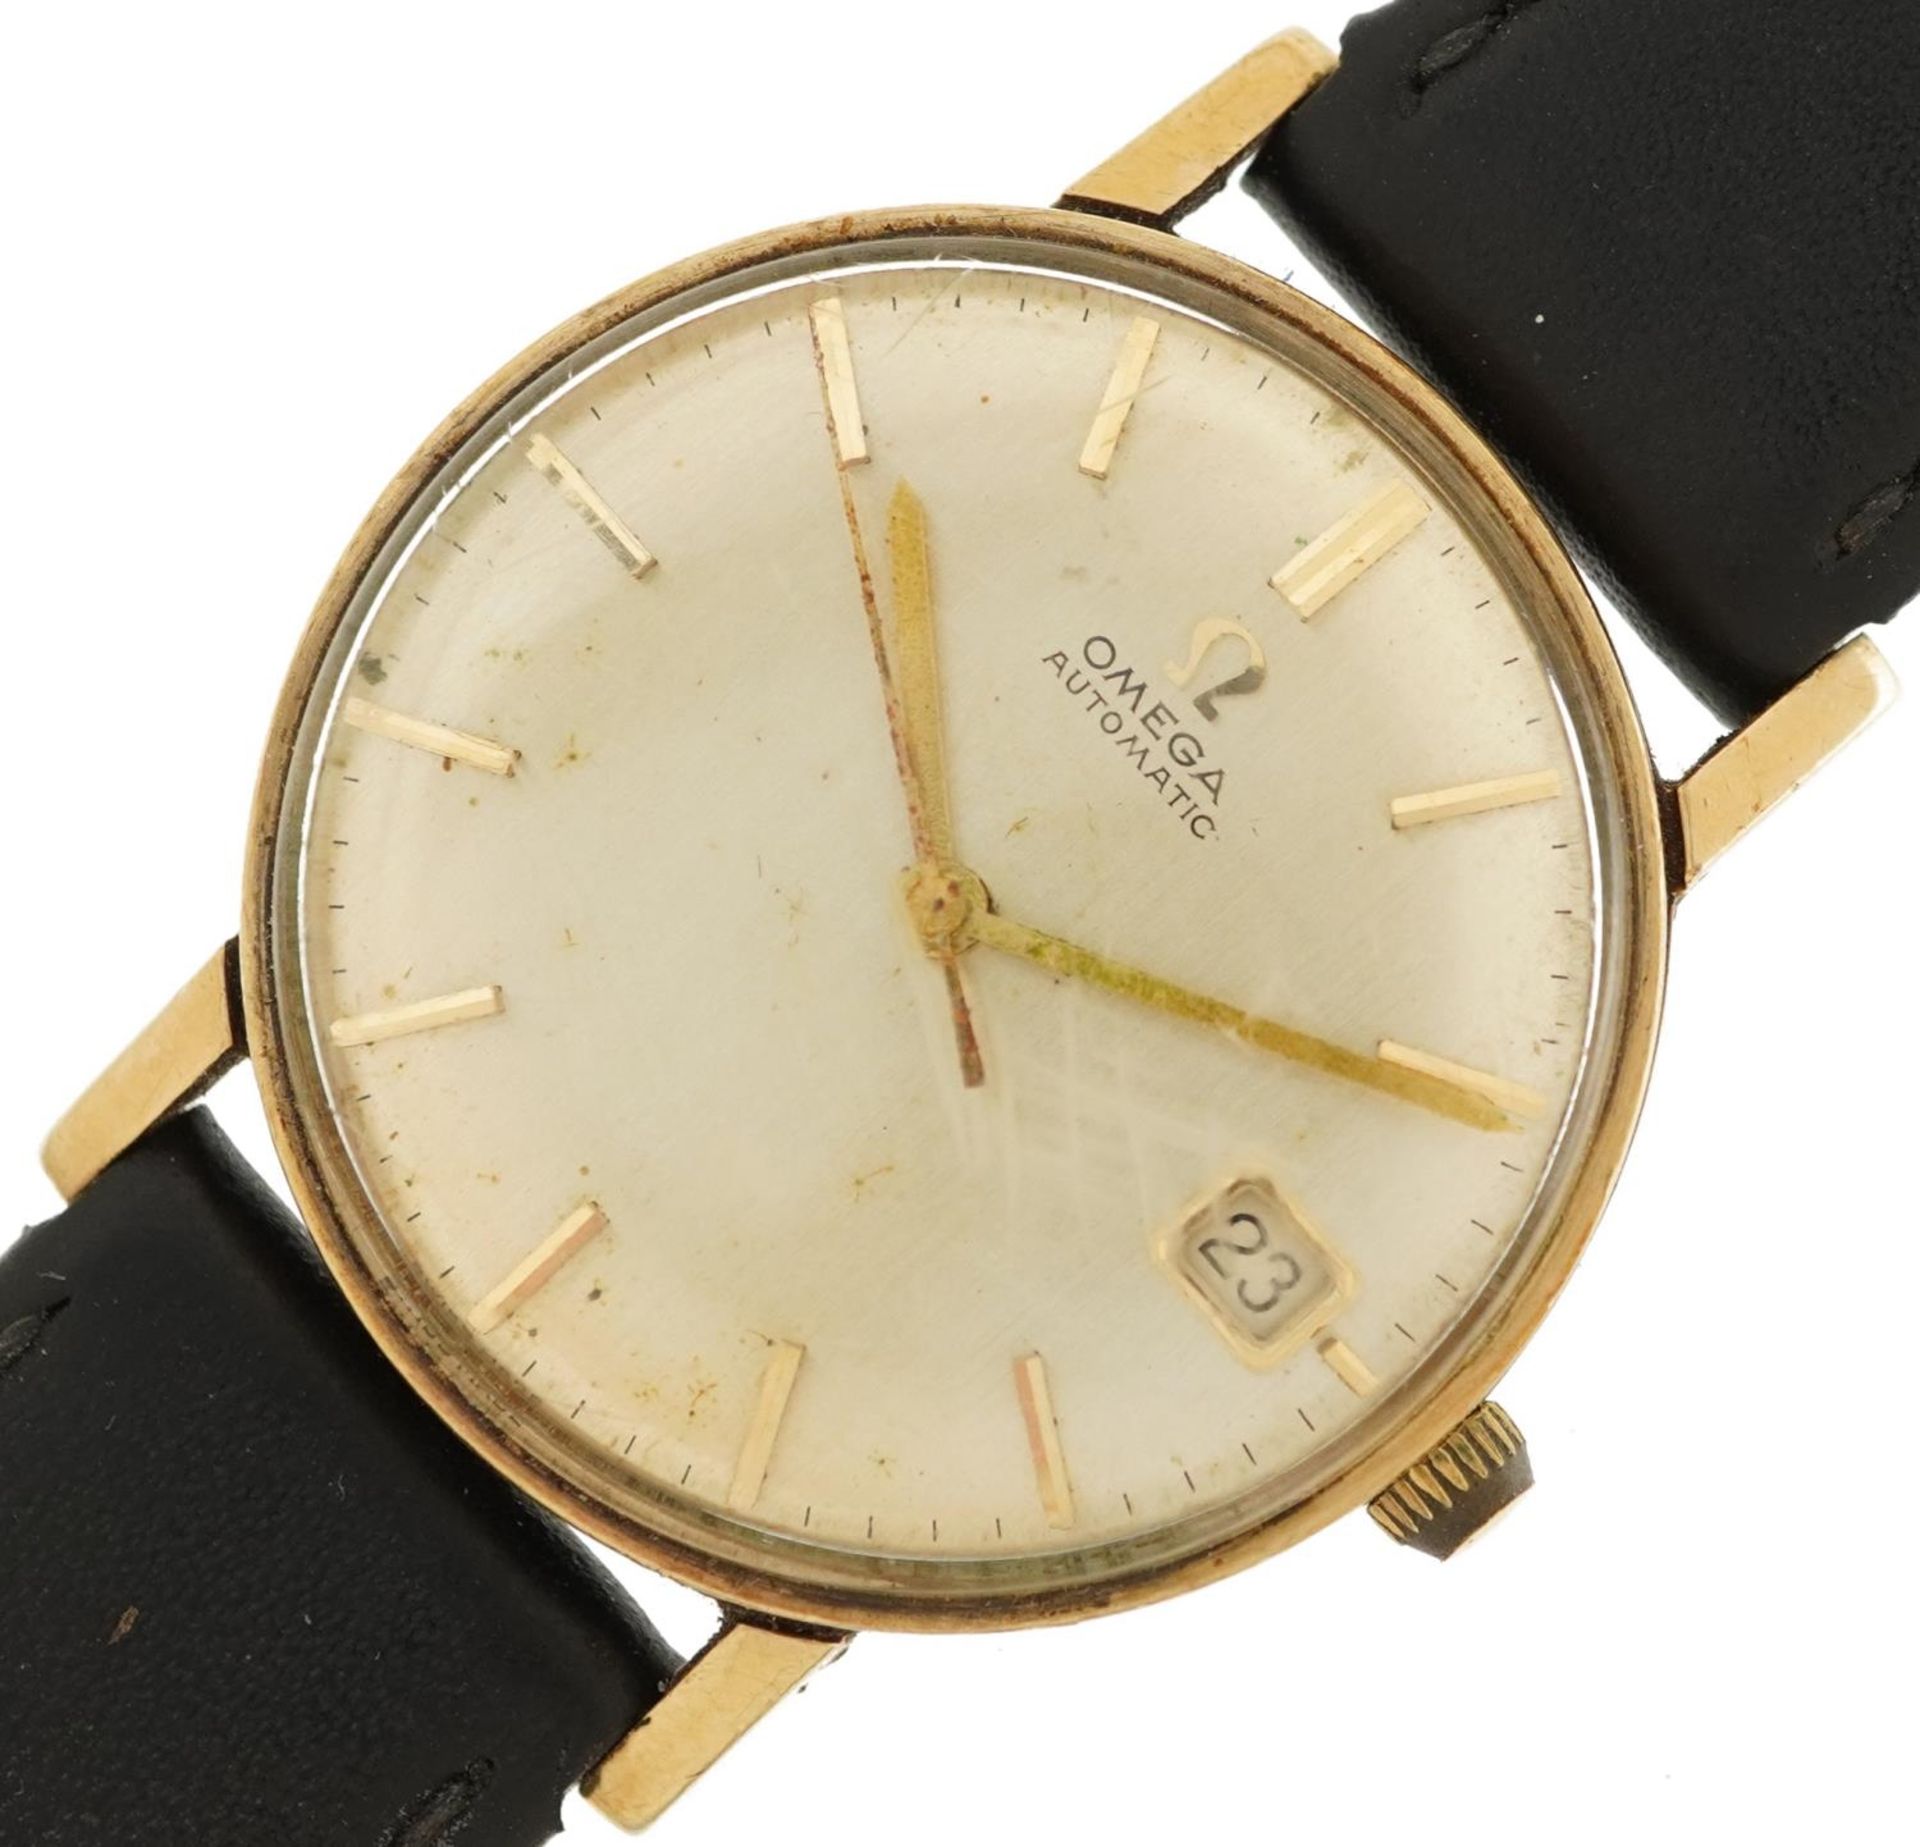 Omega, gentlemen's 9ct gold automatic wristwatch with date aperture, the movement numbered 19664649,